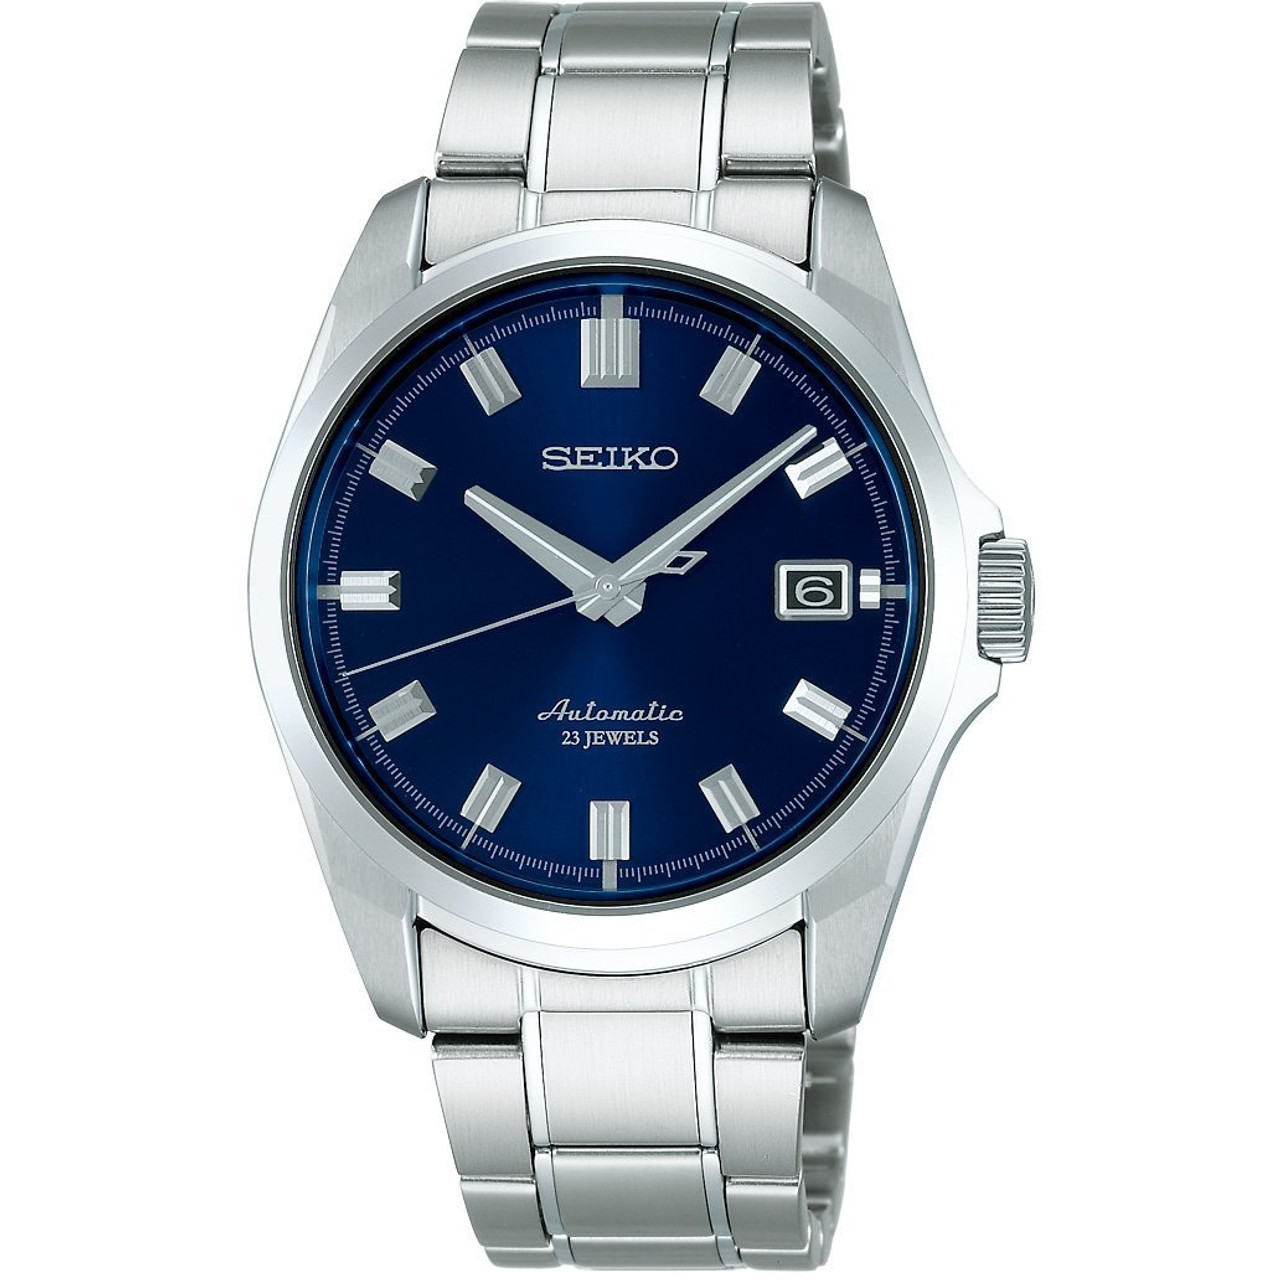 Seiko SARB045 Mechanical Automatic - Shopping In Japan NET